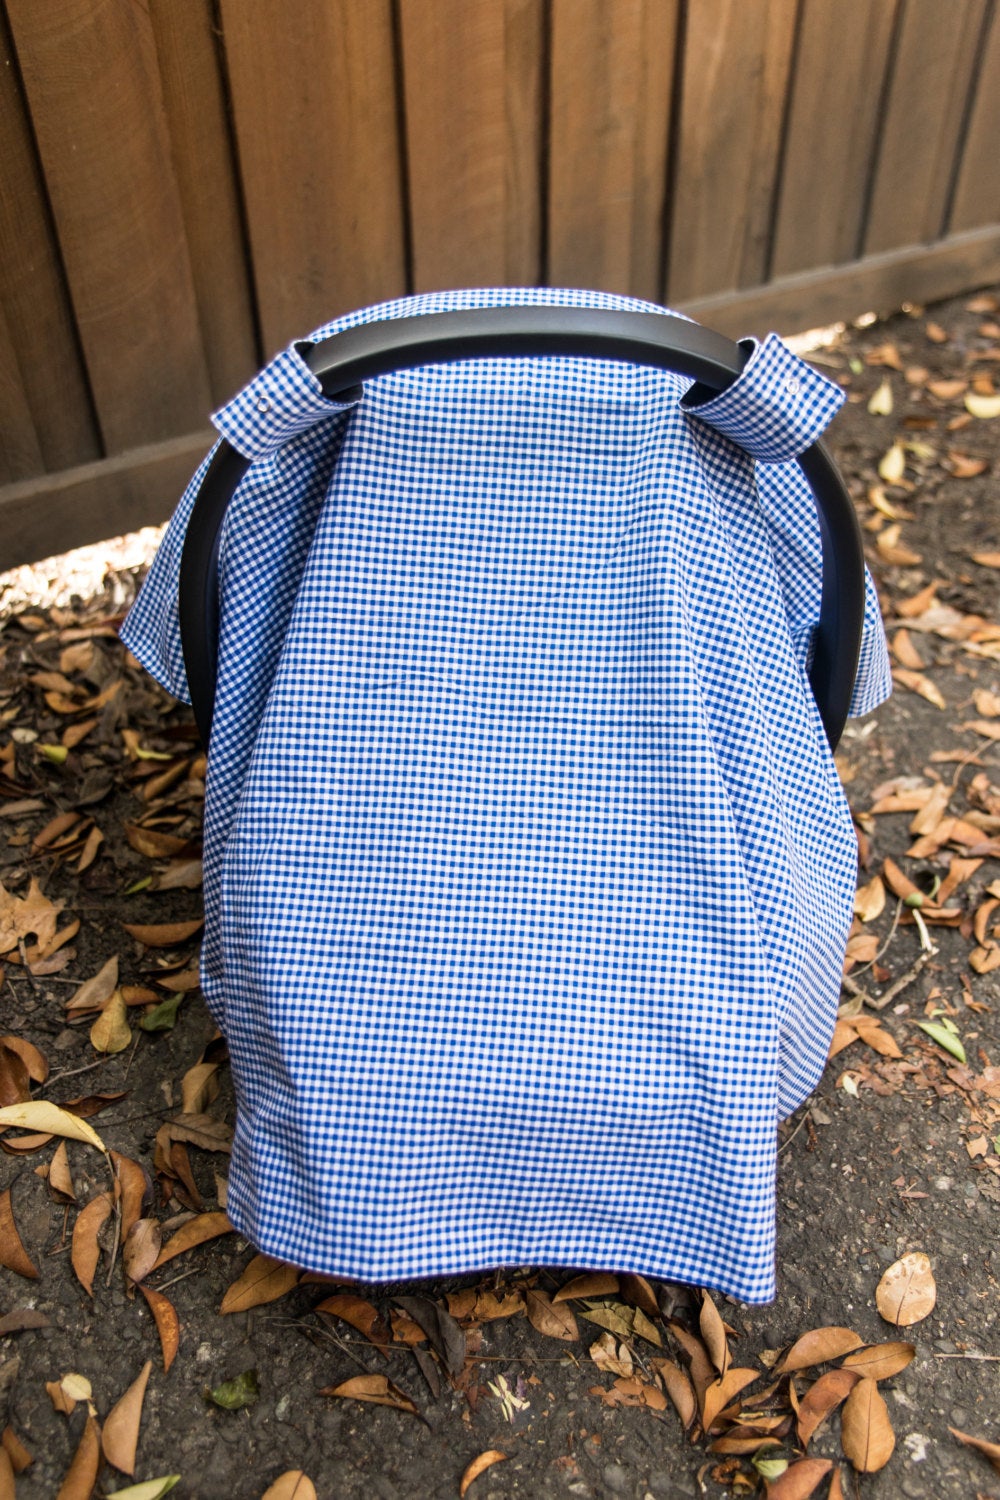 Car Seat Canopy/Cover Pattern